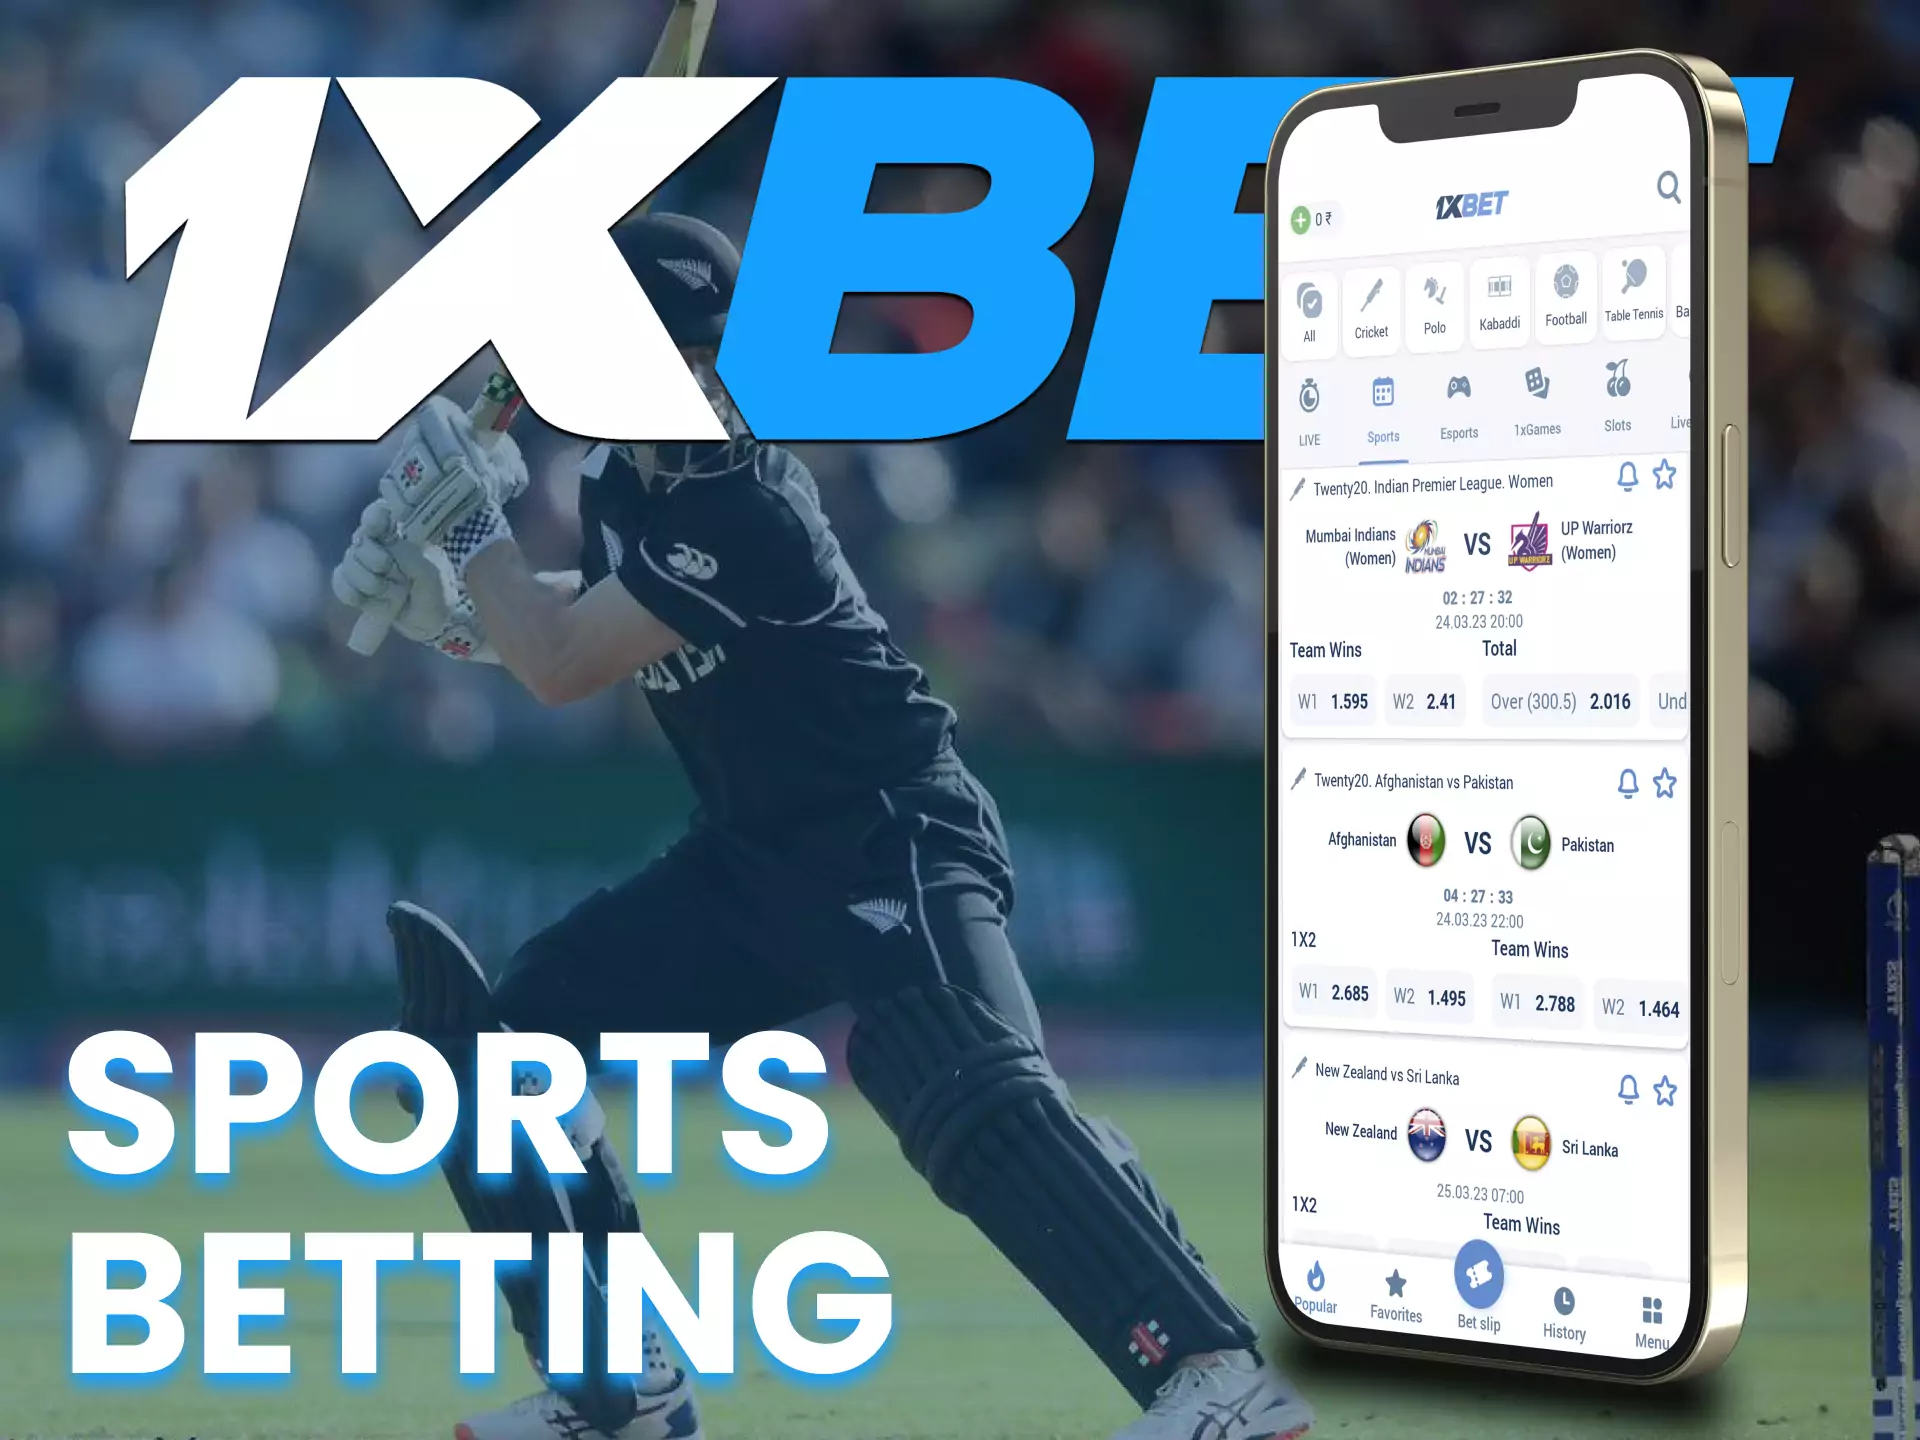 At 1xBet you can bet on any sporting event.